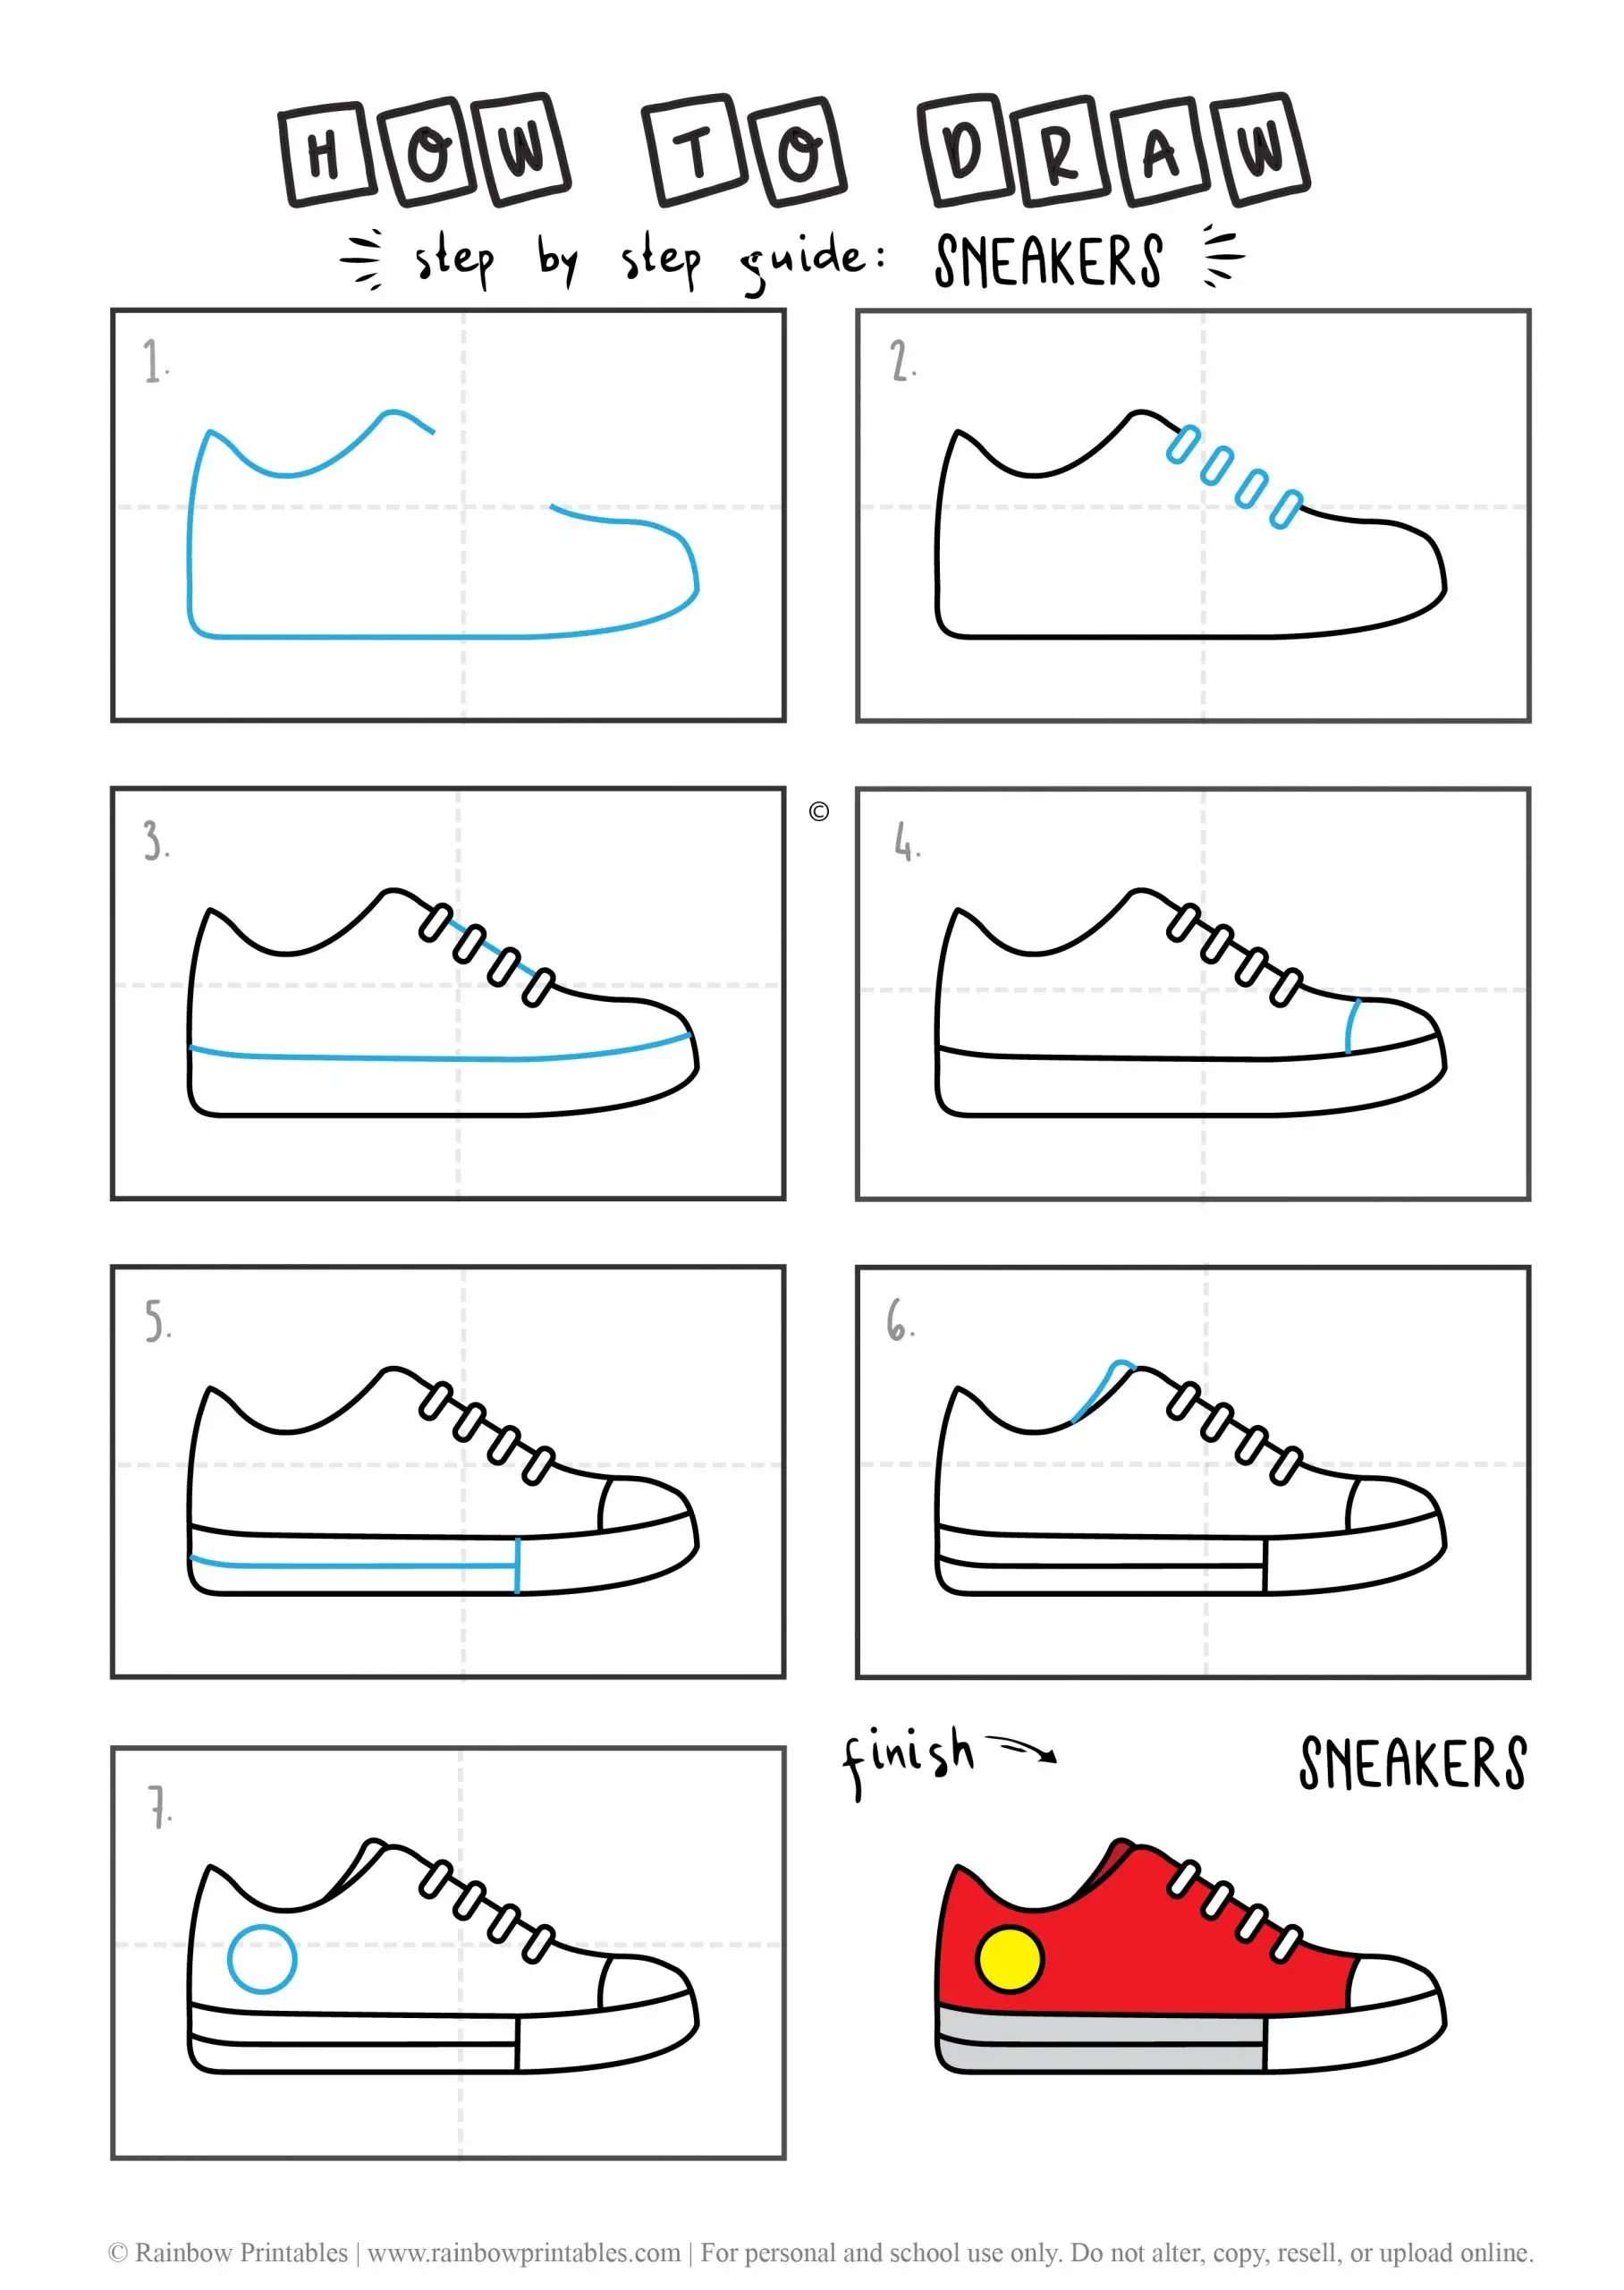 HOW TO DRAW CONVERSE SNEAKER SHOES EVERYDAY CLOTHES GUIDE ILLUSTRATION STEP BY STEP EASY SIMPLE FOR KIDS